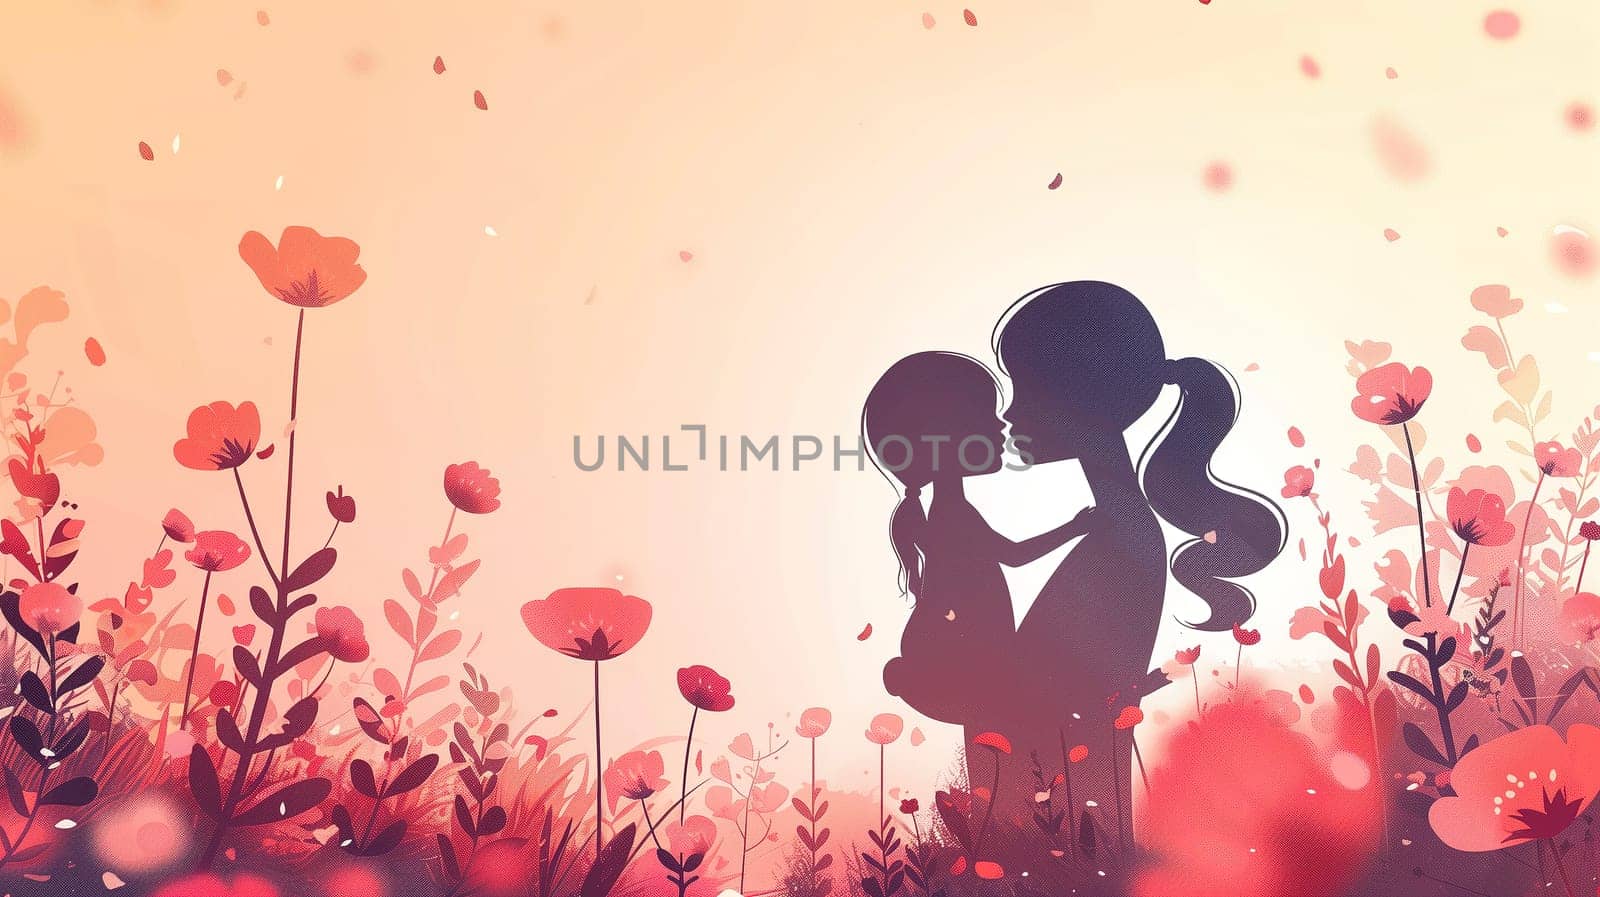 A couple is seen embracing and kissing passionately in a vast field blooming with colorful flowers. The scene portrays intimacy and love in nature on a sunny day.